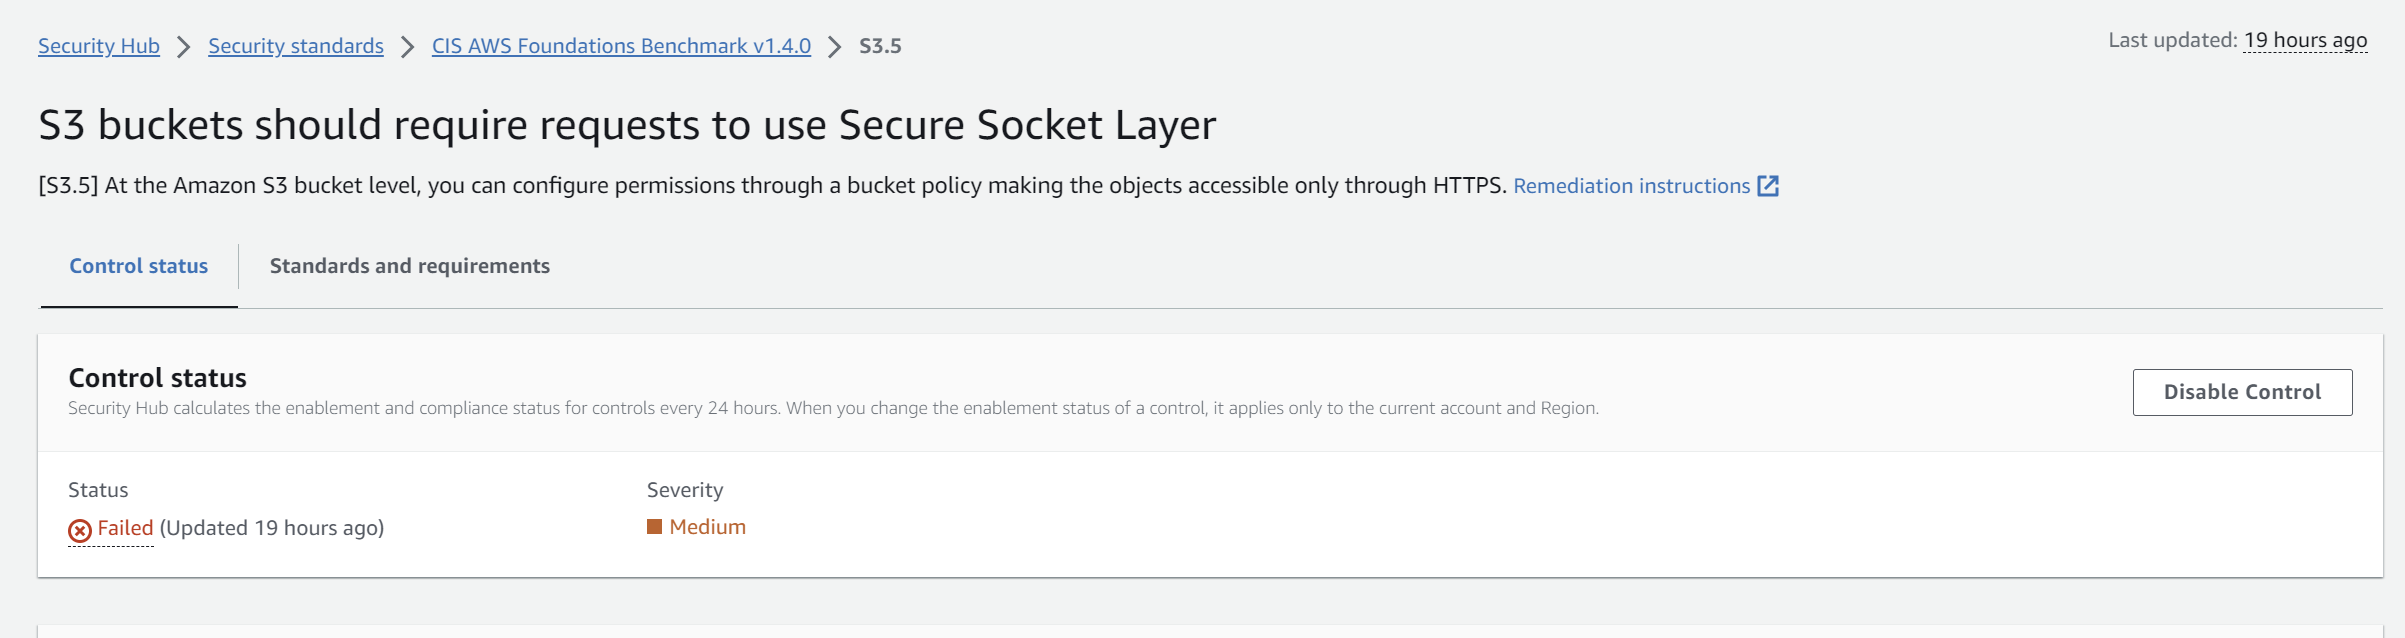 S3 buckets should require requests to use Secure Socket Layer